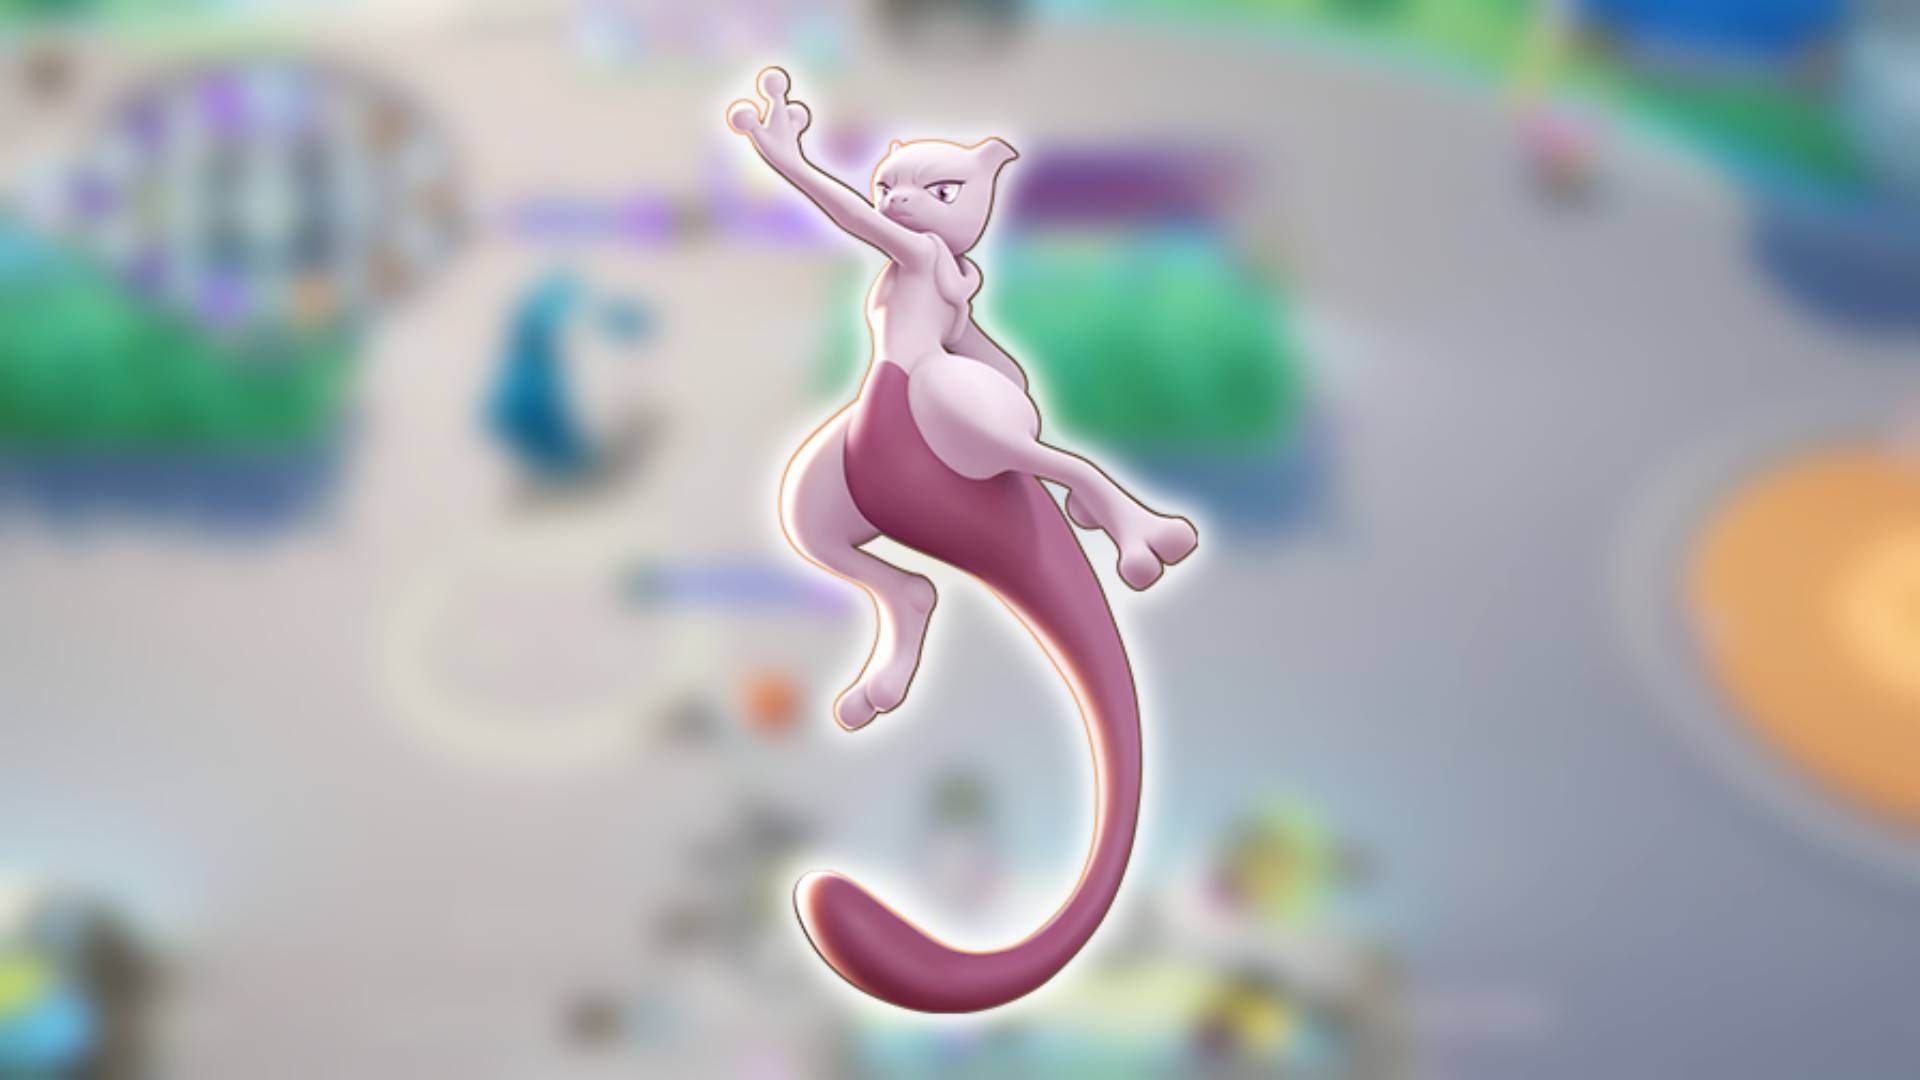 Pokemon Unite: How to Unlock Mewtwo Y and Its Cost